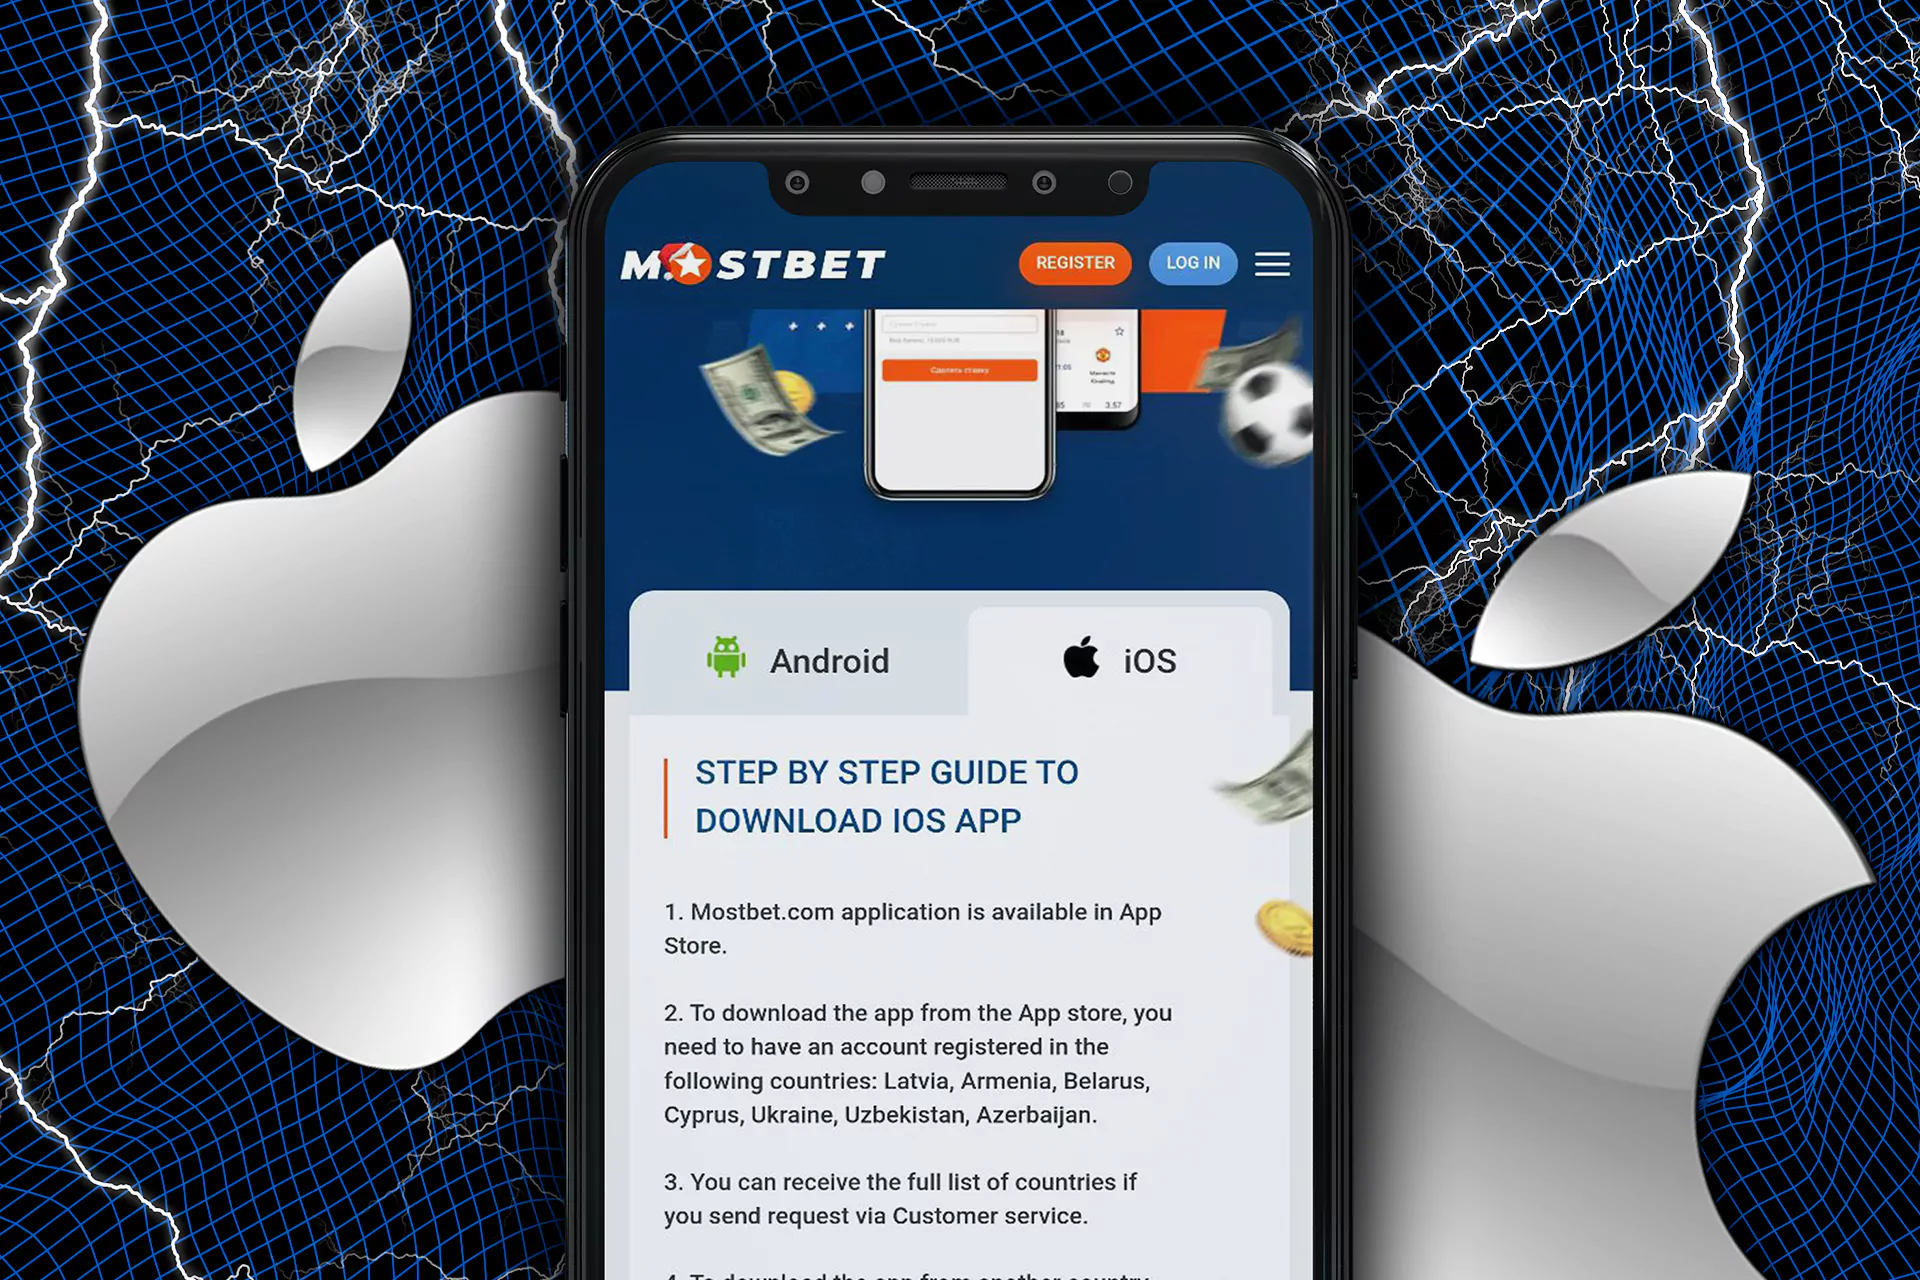 Mostbet app for iOS.